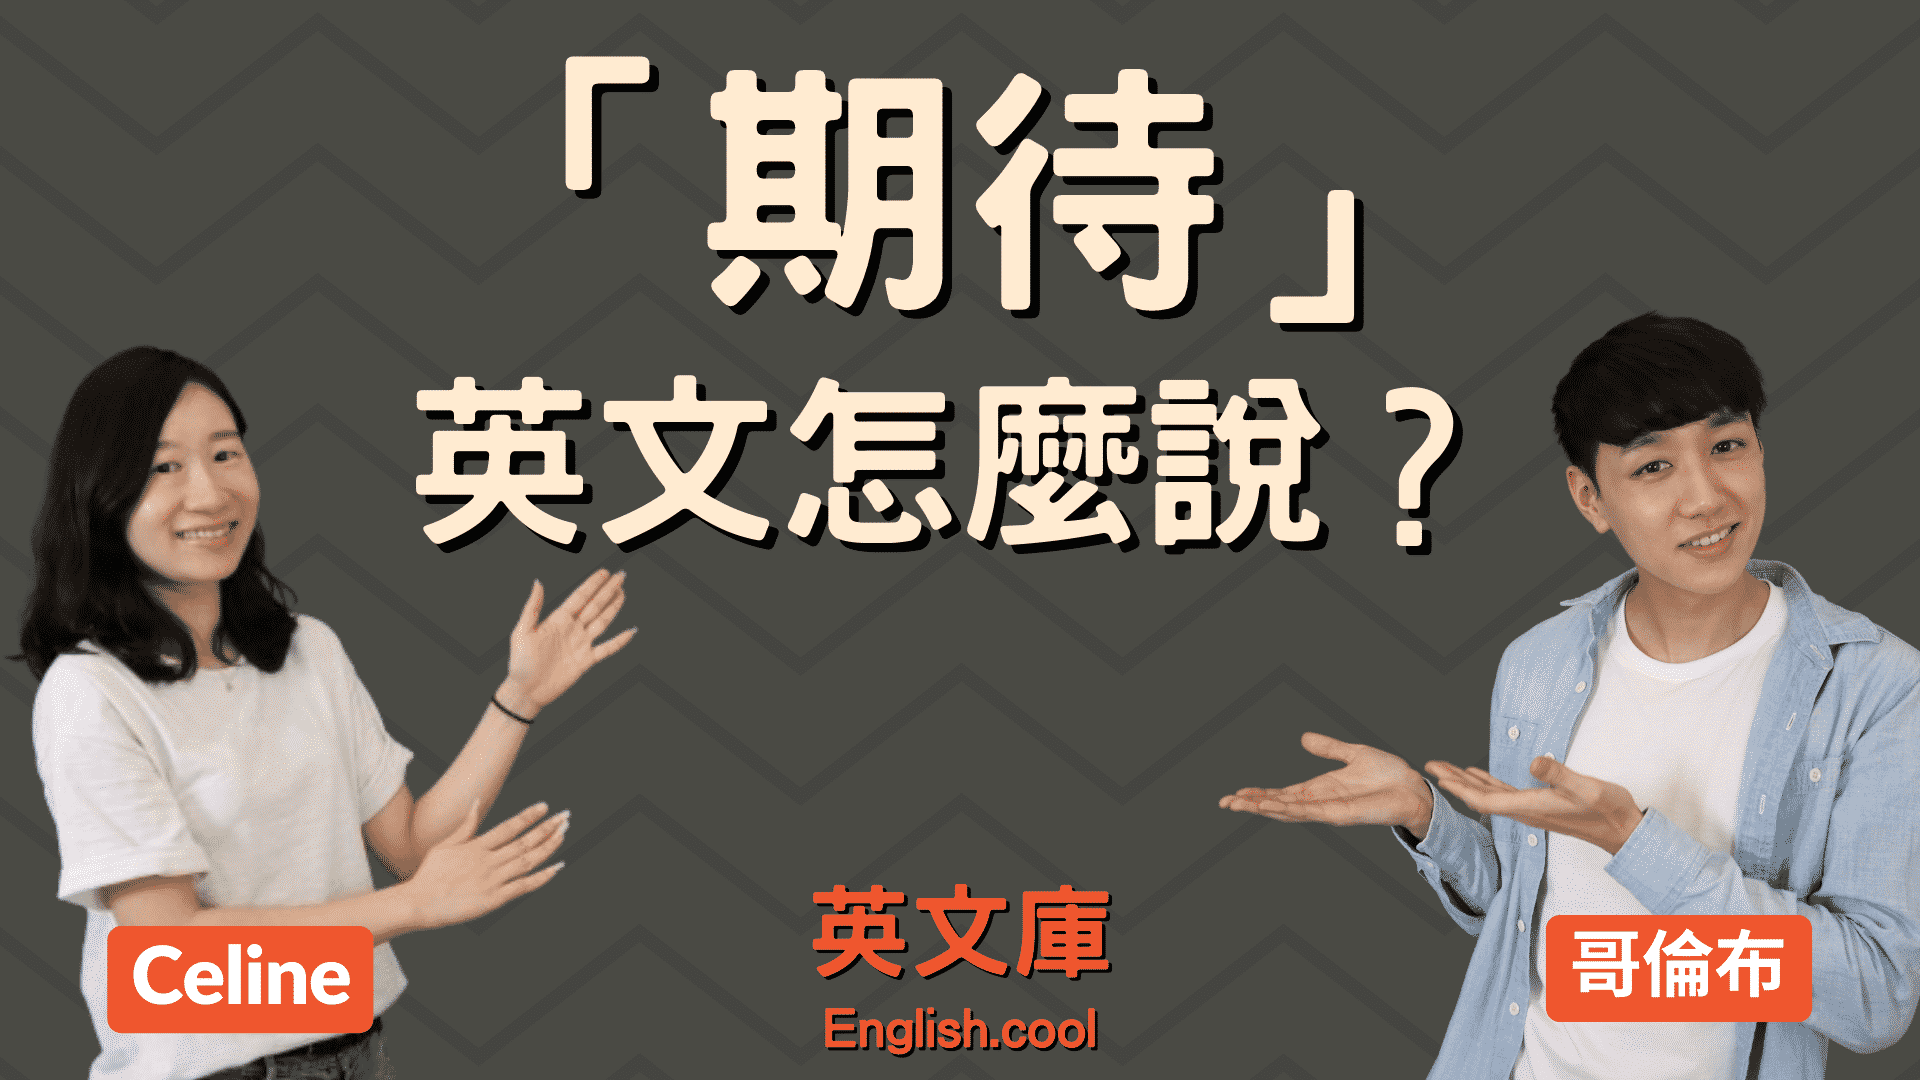 You are currently viewing 「期待」英文怎麼說？Look forward to? Expect?（含例句）